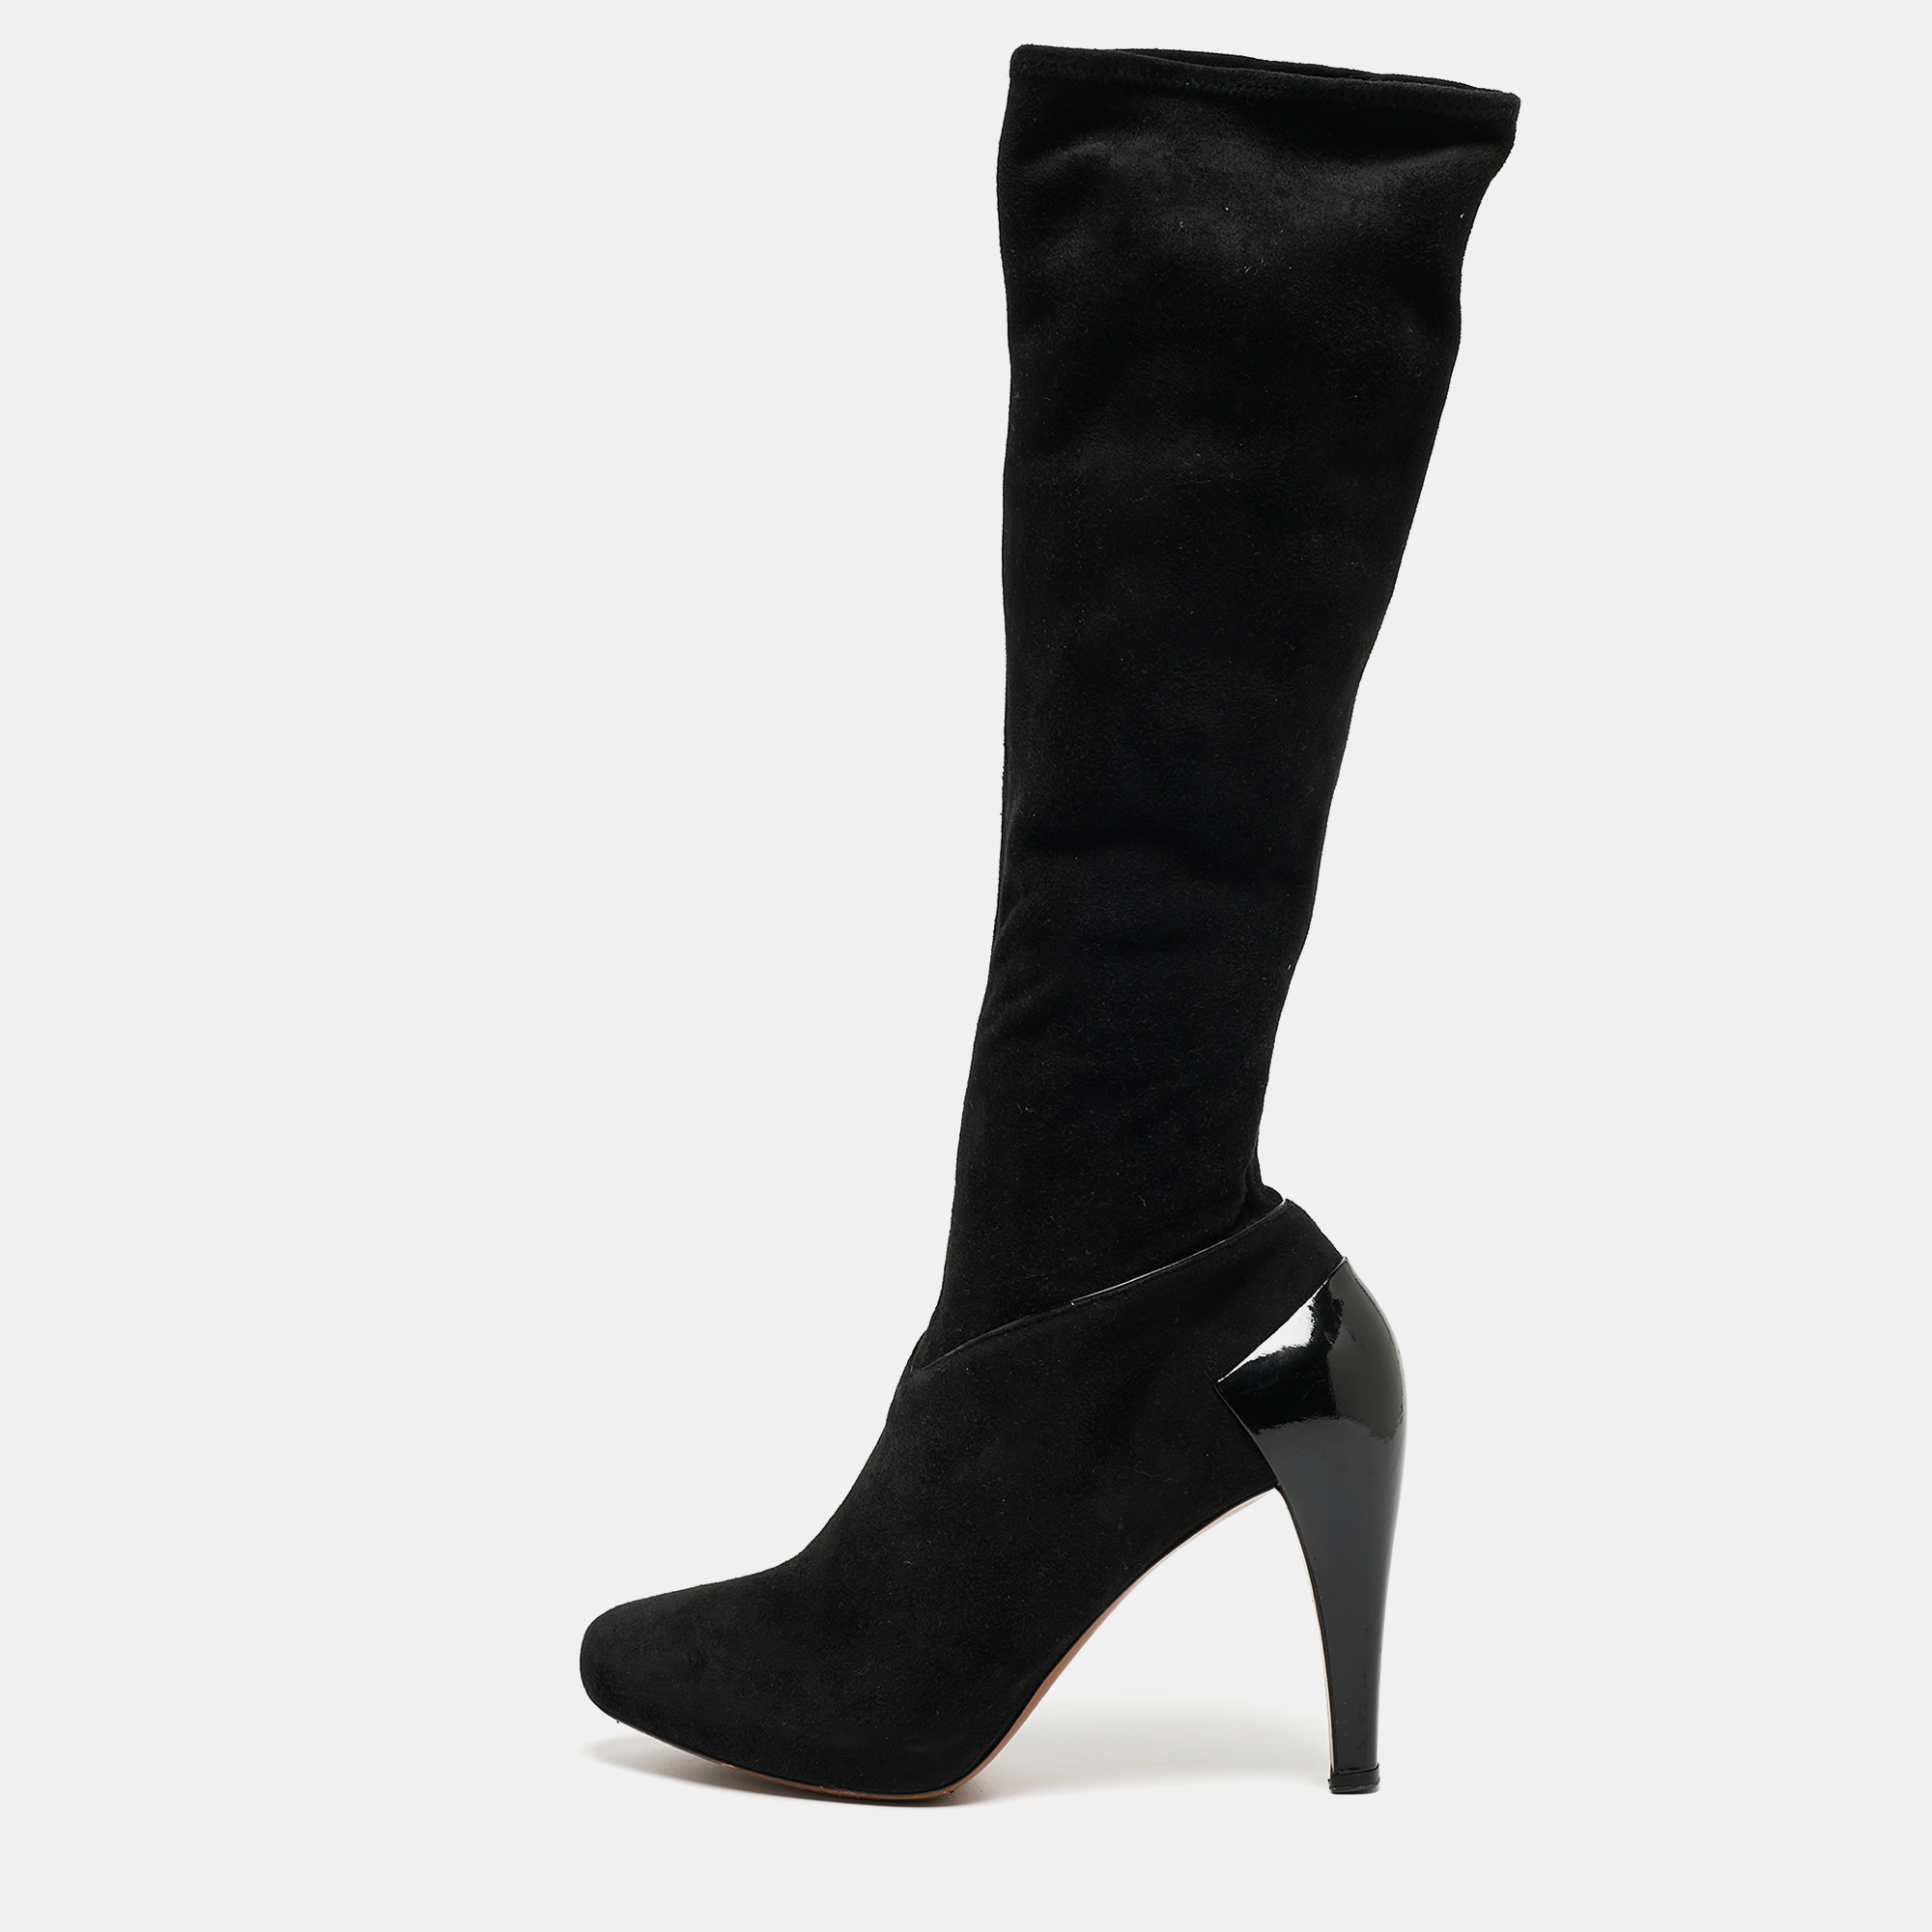 Alaia black suede midcalf boots size 36